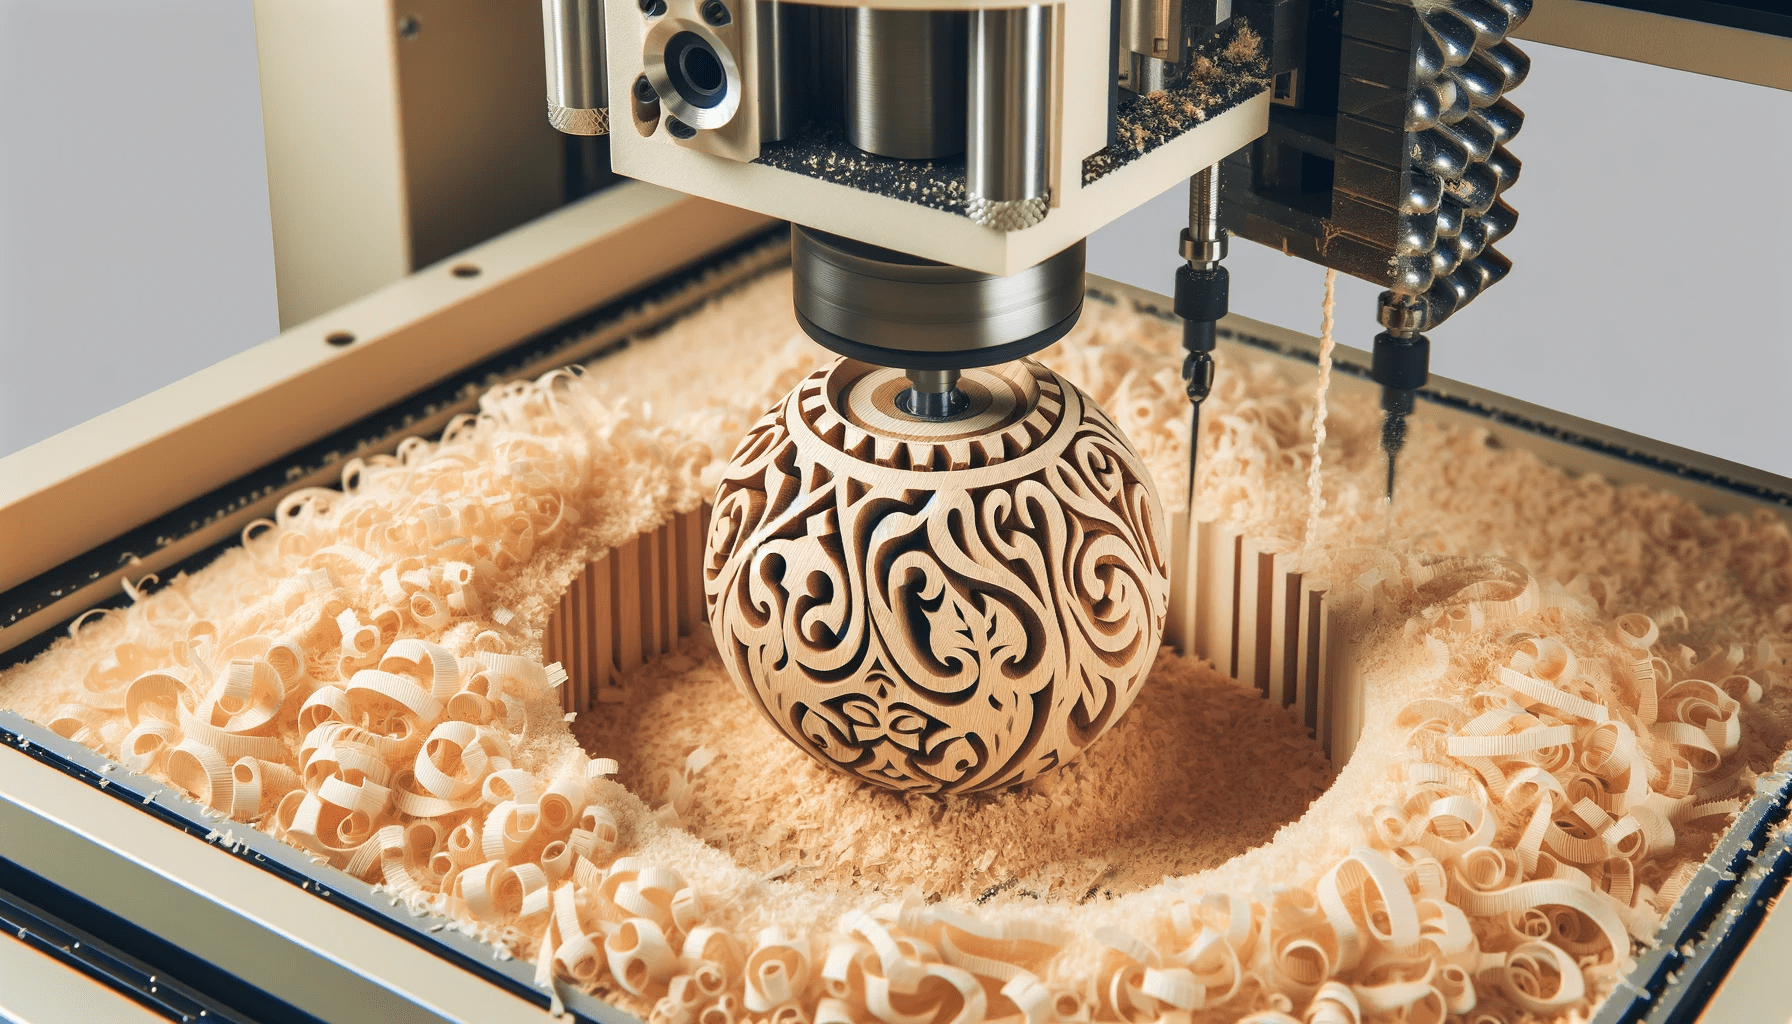 CNC machine in the process of carving a unique wooden gift, with fine shavings around the item showing intricate designs being etched